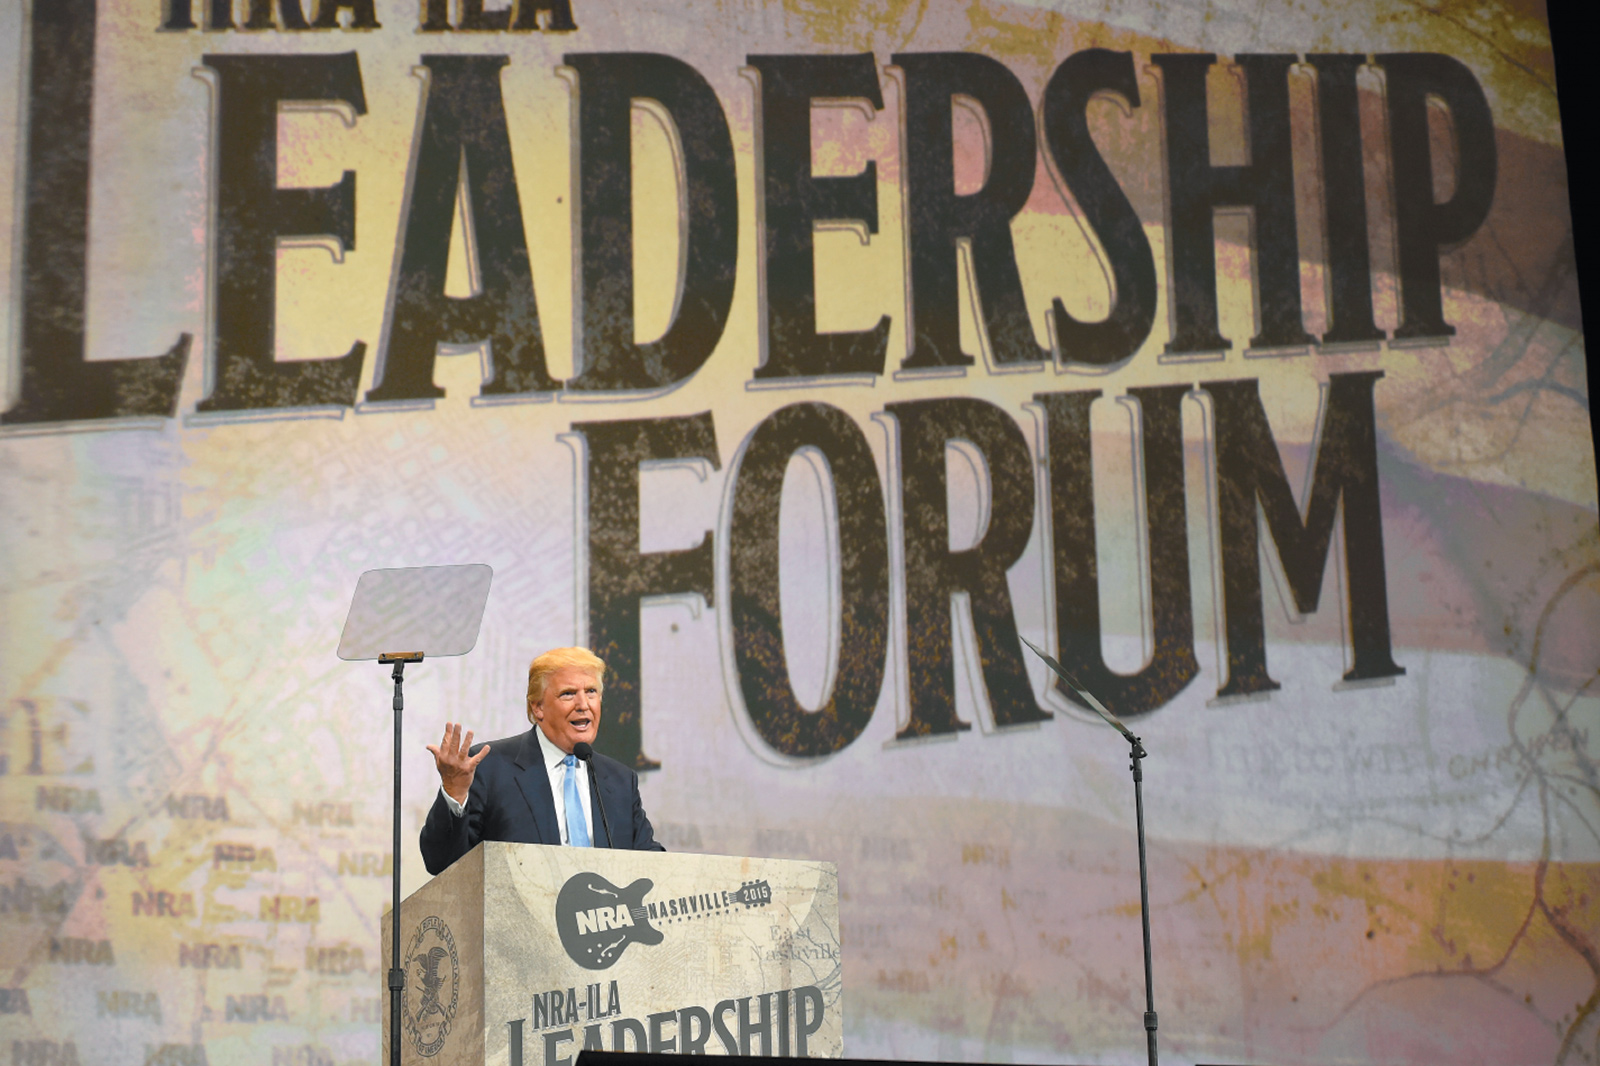 Donald Trump speaking at the National Rifle Association’s annual meeting, Nashville, April 2015